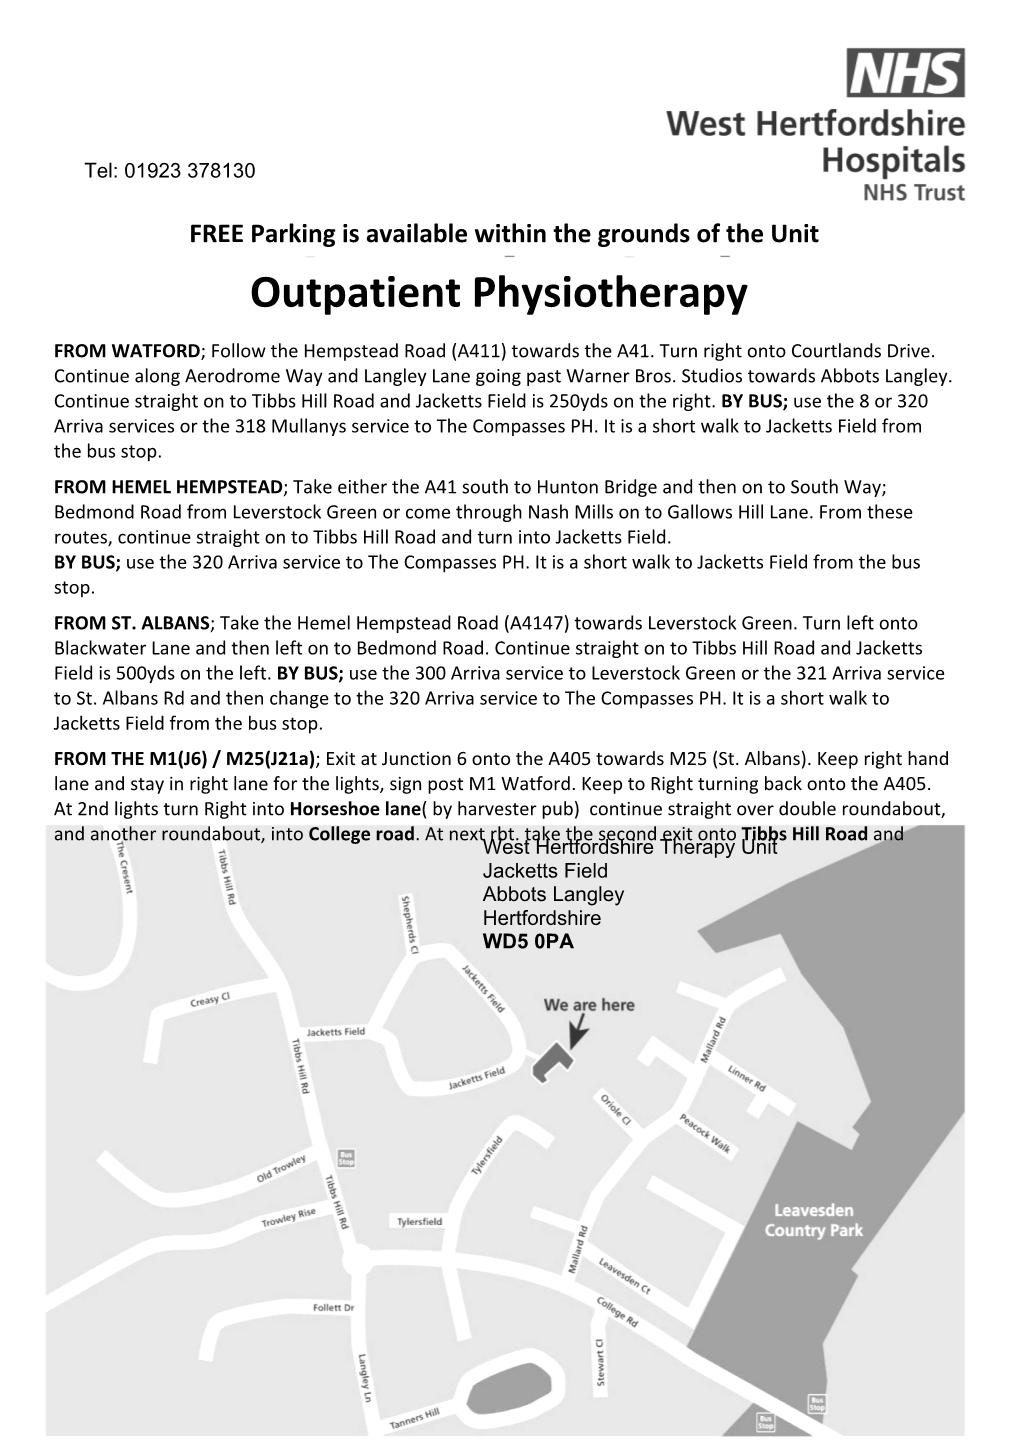 Outpatient Physiotherapy